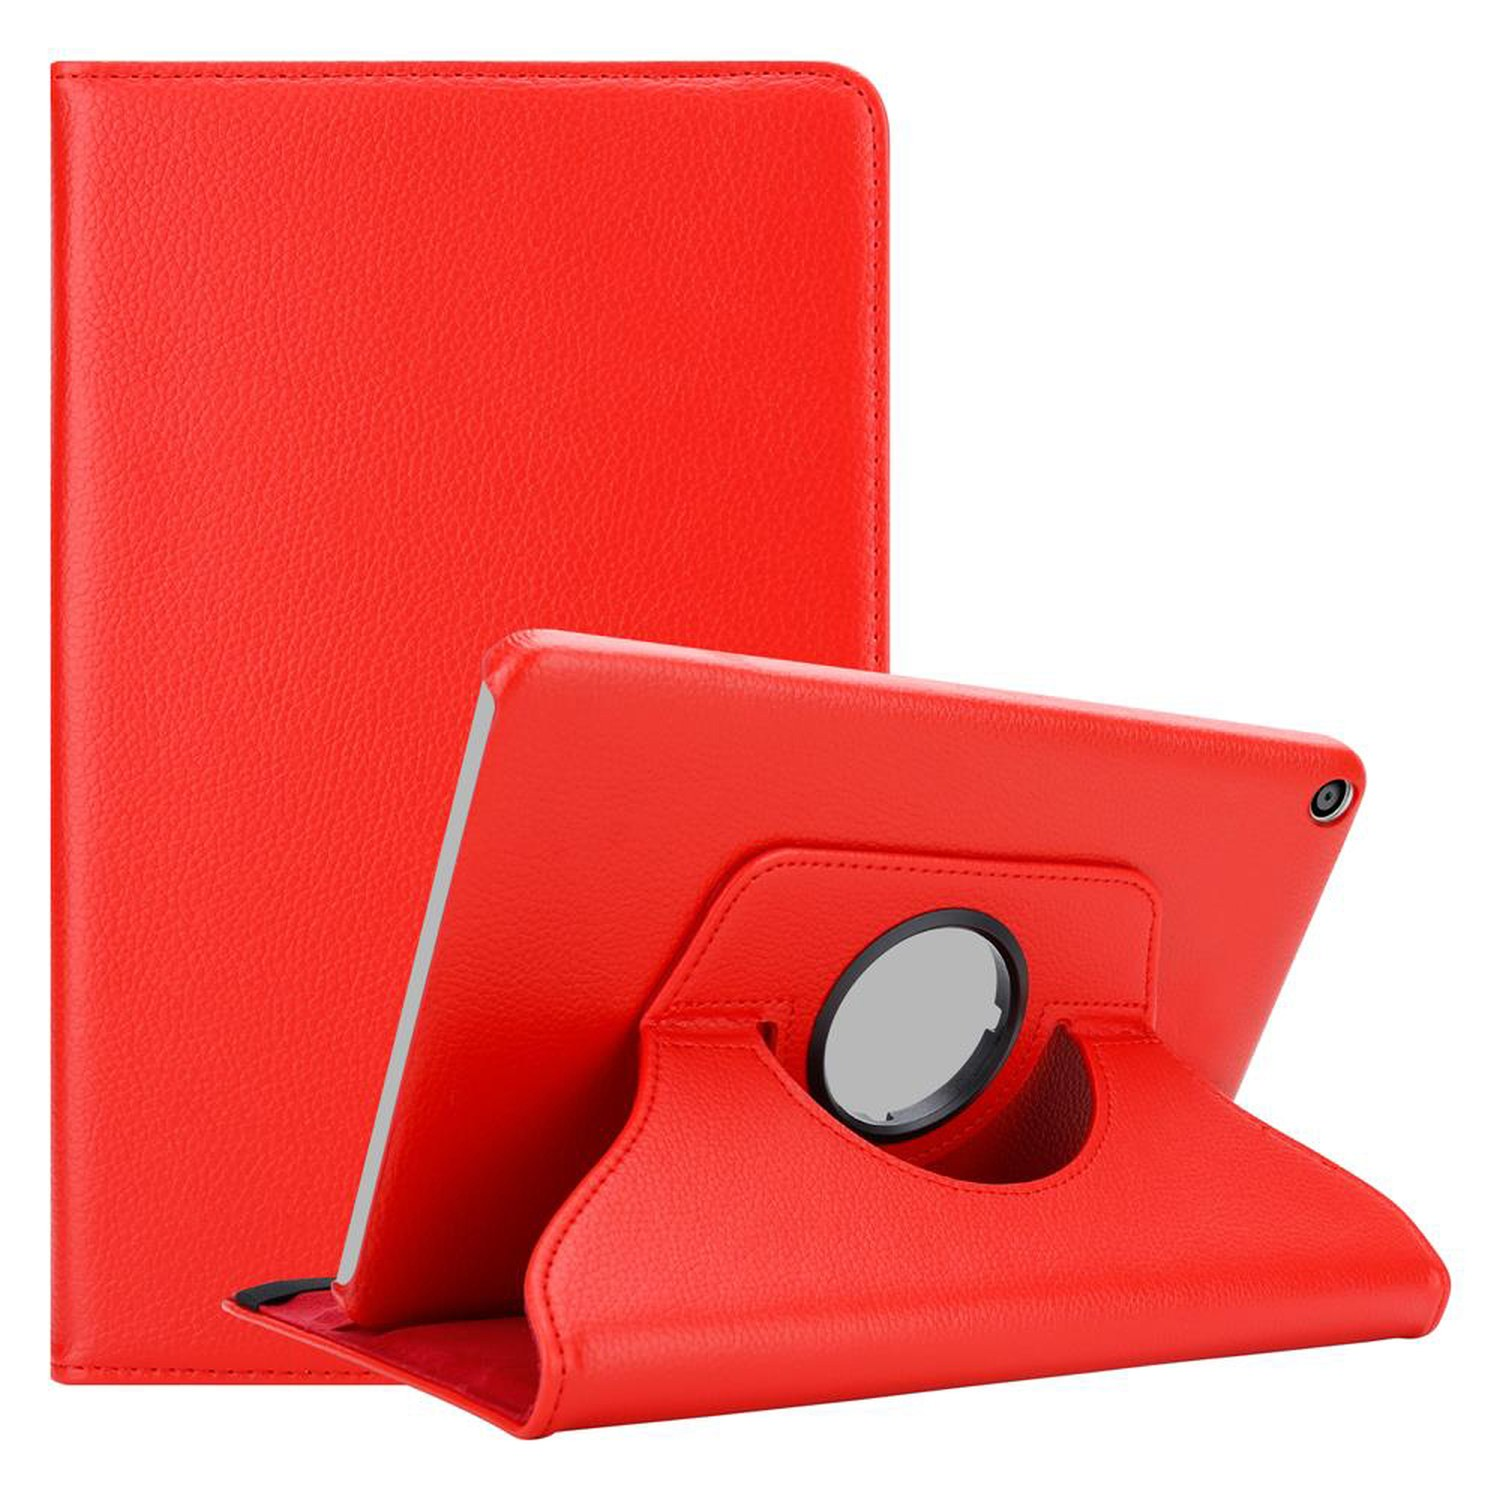 Style, ROT T3 (8.0 Zoll), Bookcover, Tablet Hülle 8 MOHN MediaPad Huawei, CADORABO Book im